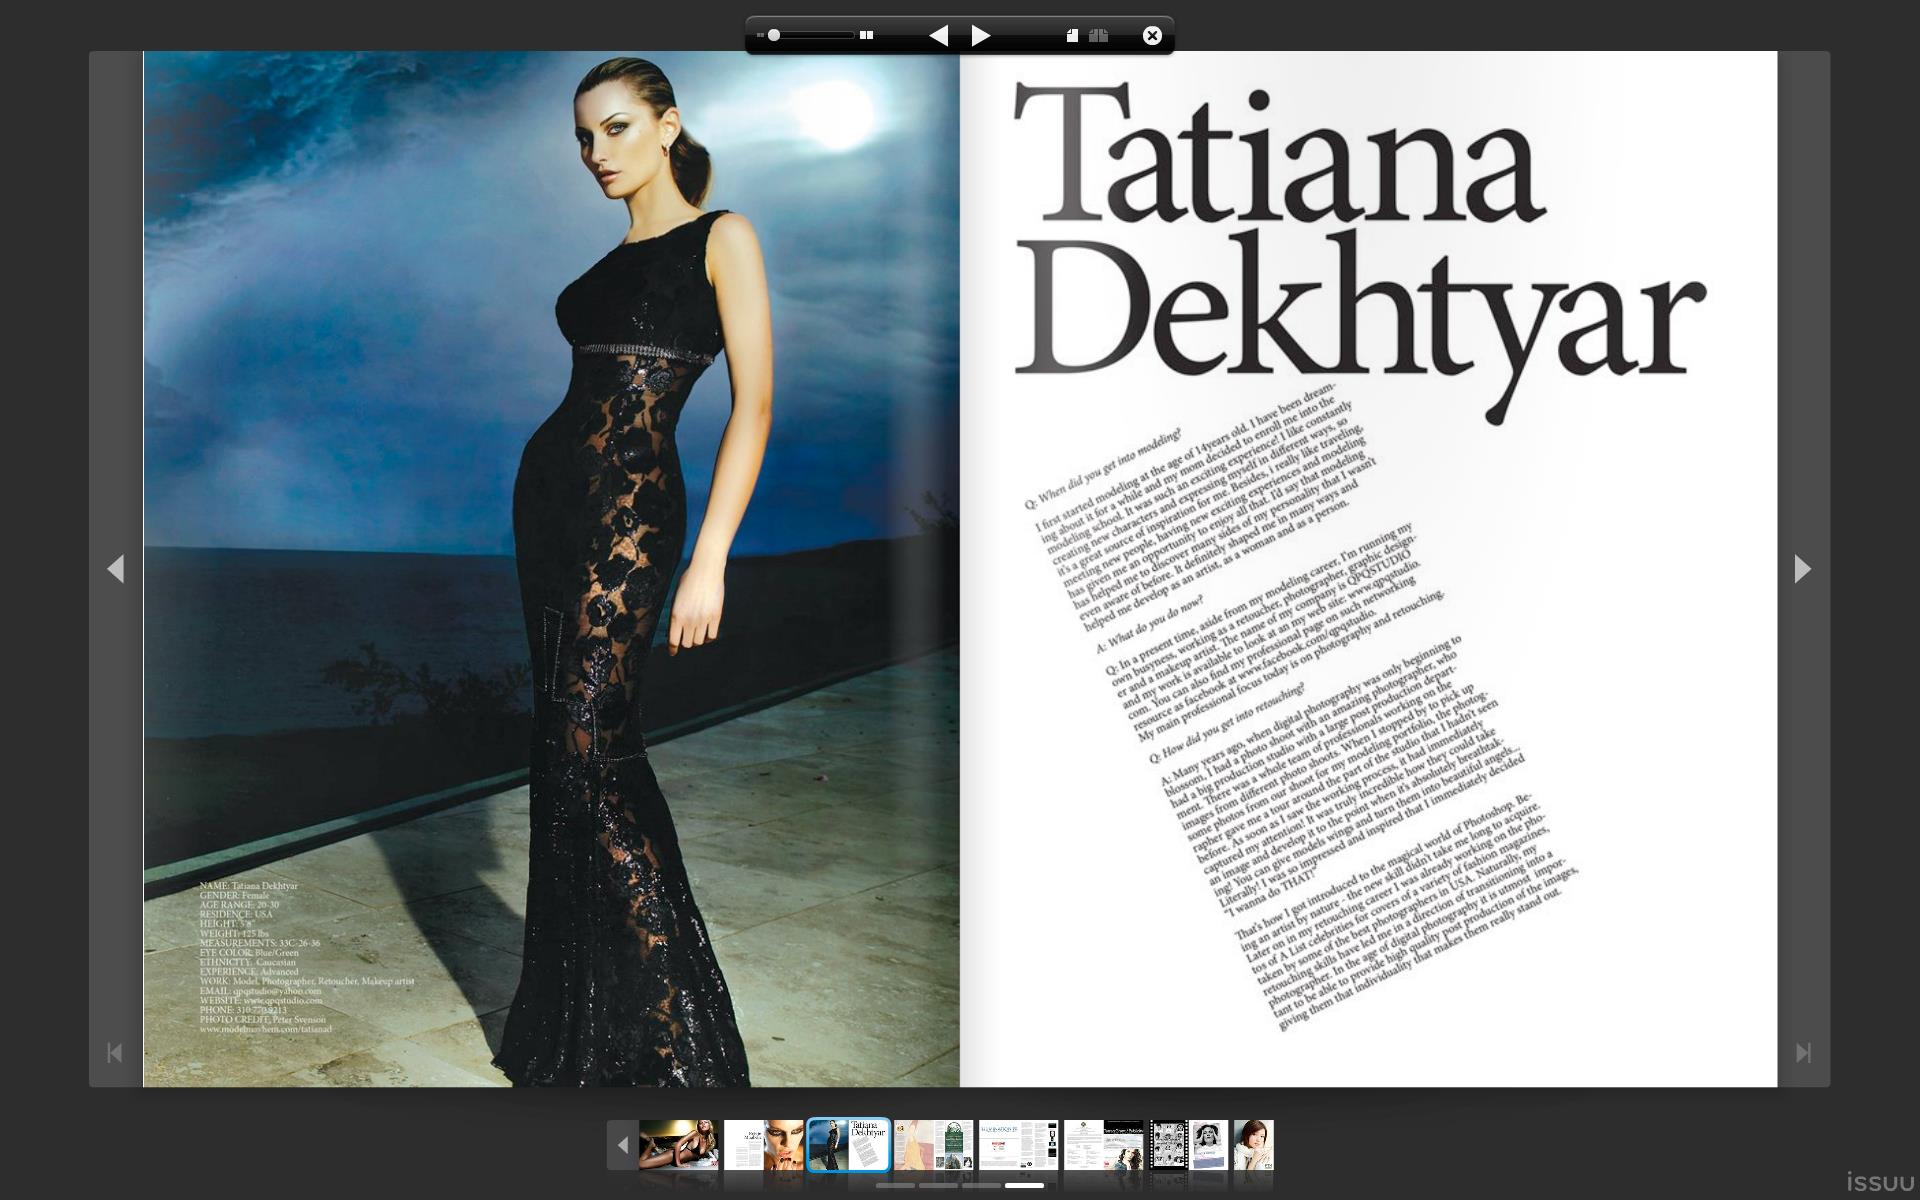 Tatiana DeKhtyar featured in the hollyday issue of the 